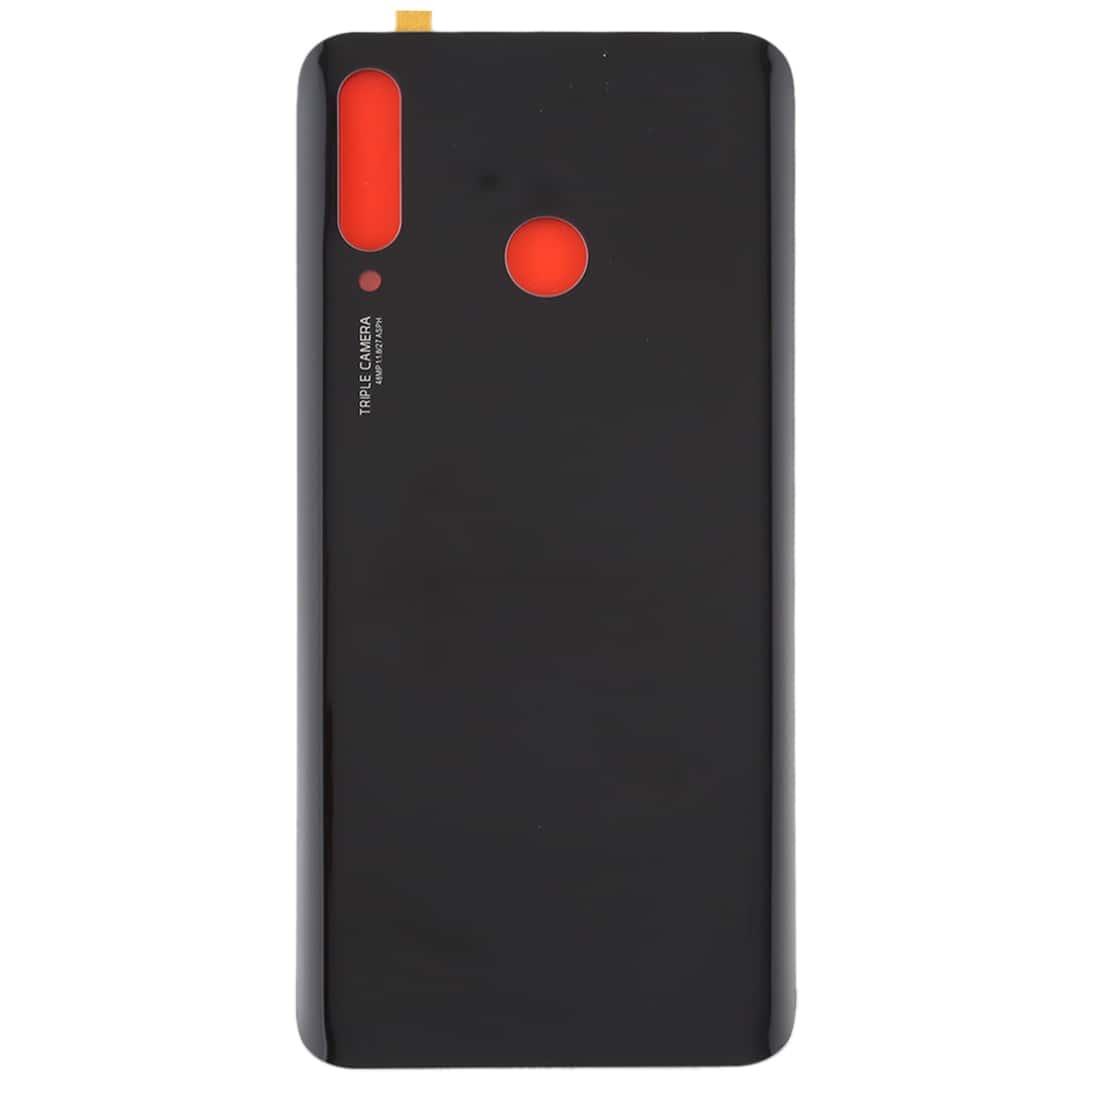 Back Glass Panel for Huawei P30 Lite Black with Camera Lens